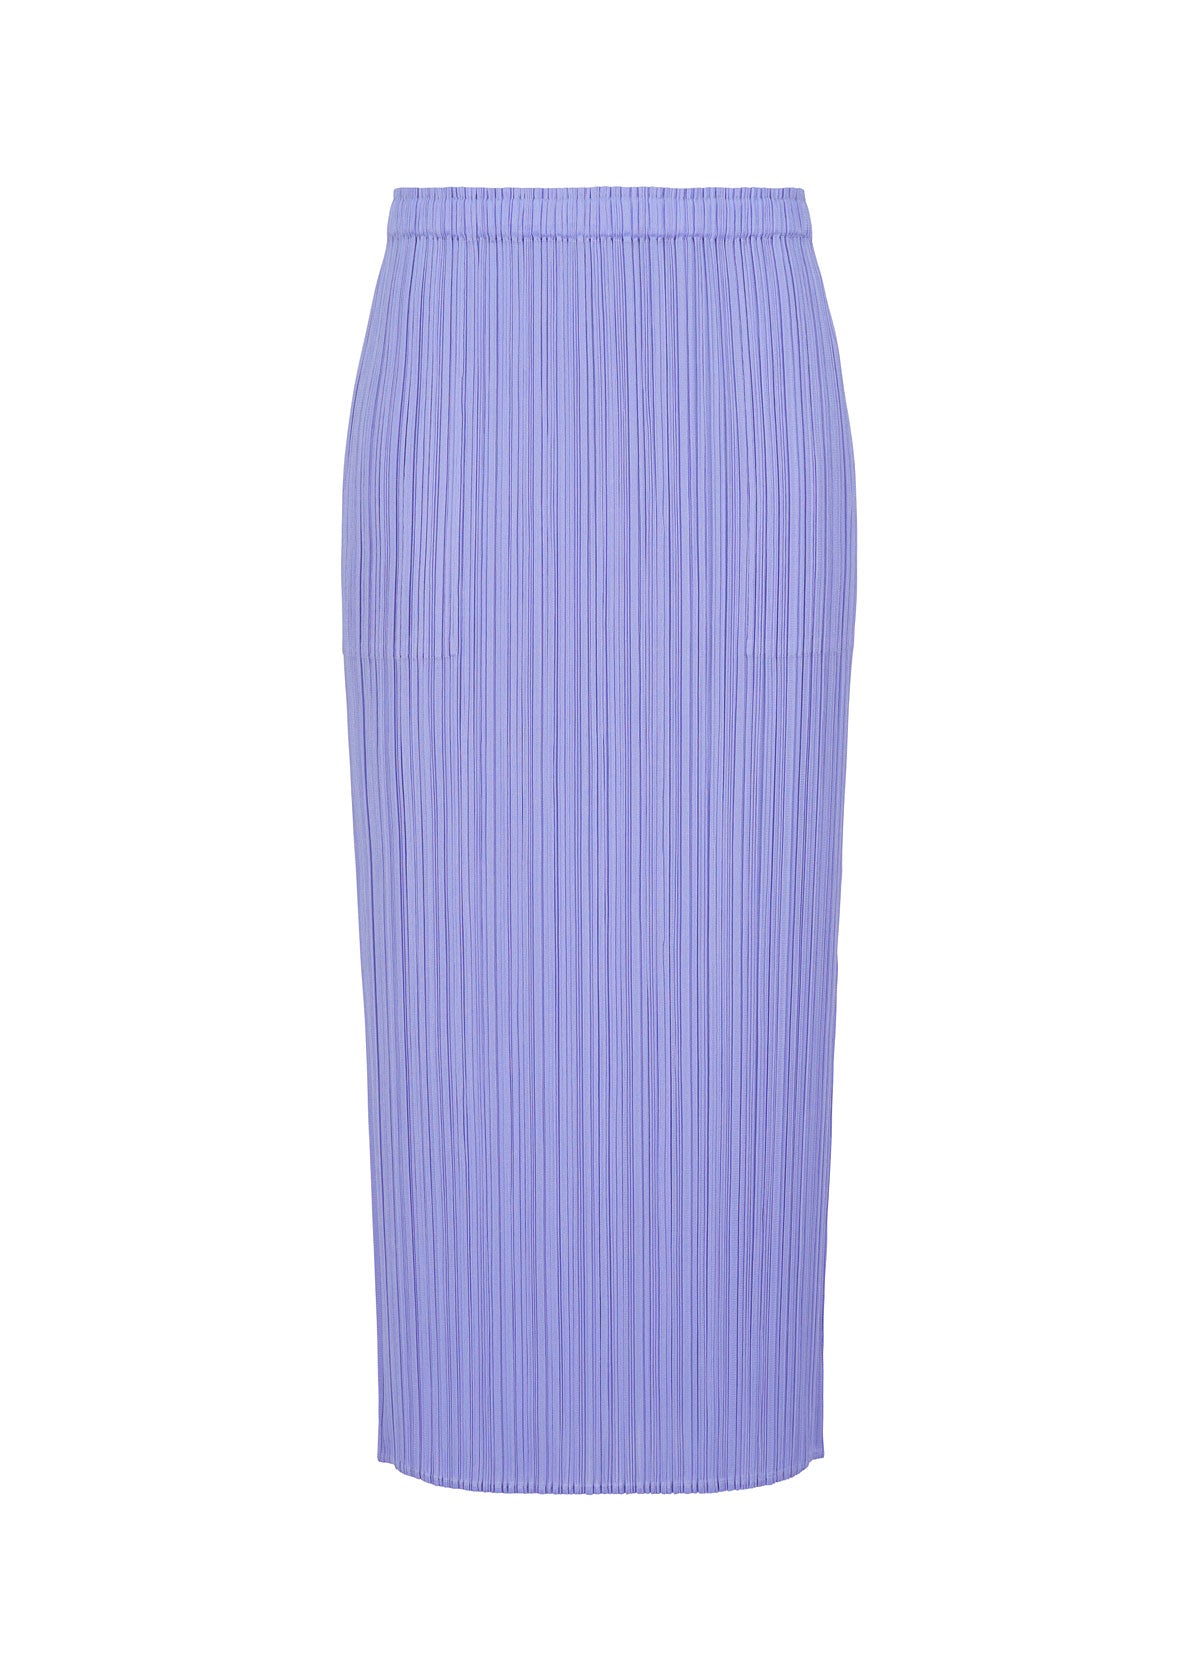 NEW COLORFUL BASICS 3 SKIRT | The official ISSEY MIYAKE ONLINE STORE ...